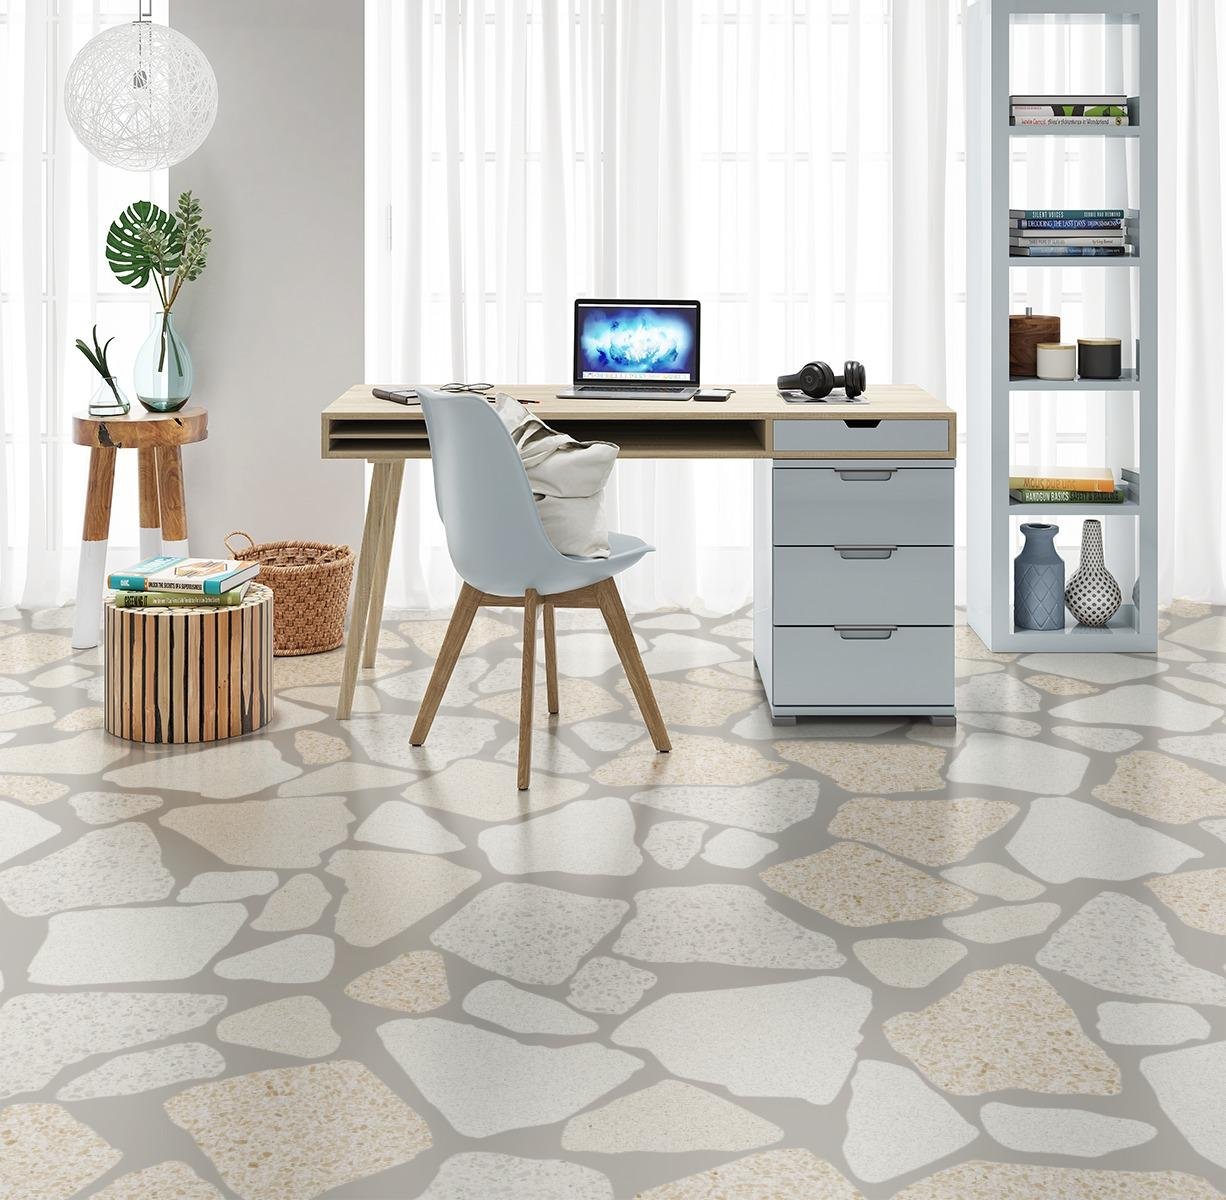 Stepping Stones, Pattern A, Grande Scale, Terrazzo Medium White, Terrazzo Small White, Terrazzo Medium Beige, Terrazzo Small Beige